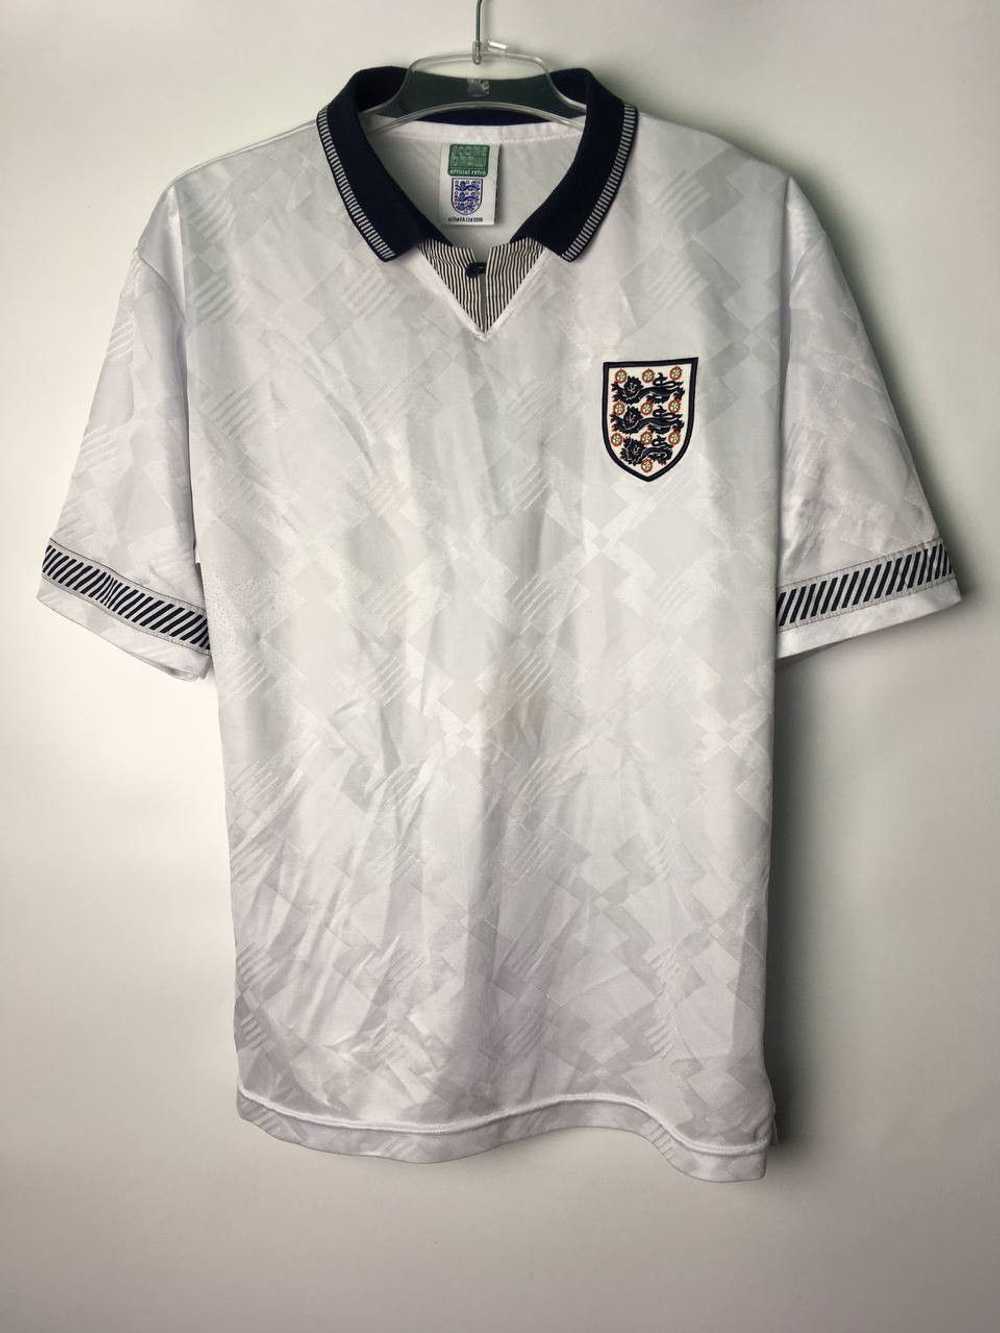 Soccer Jersey × Vintage England 1990 World Cup Fi… - image 1